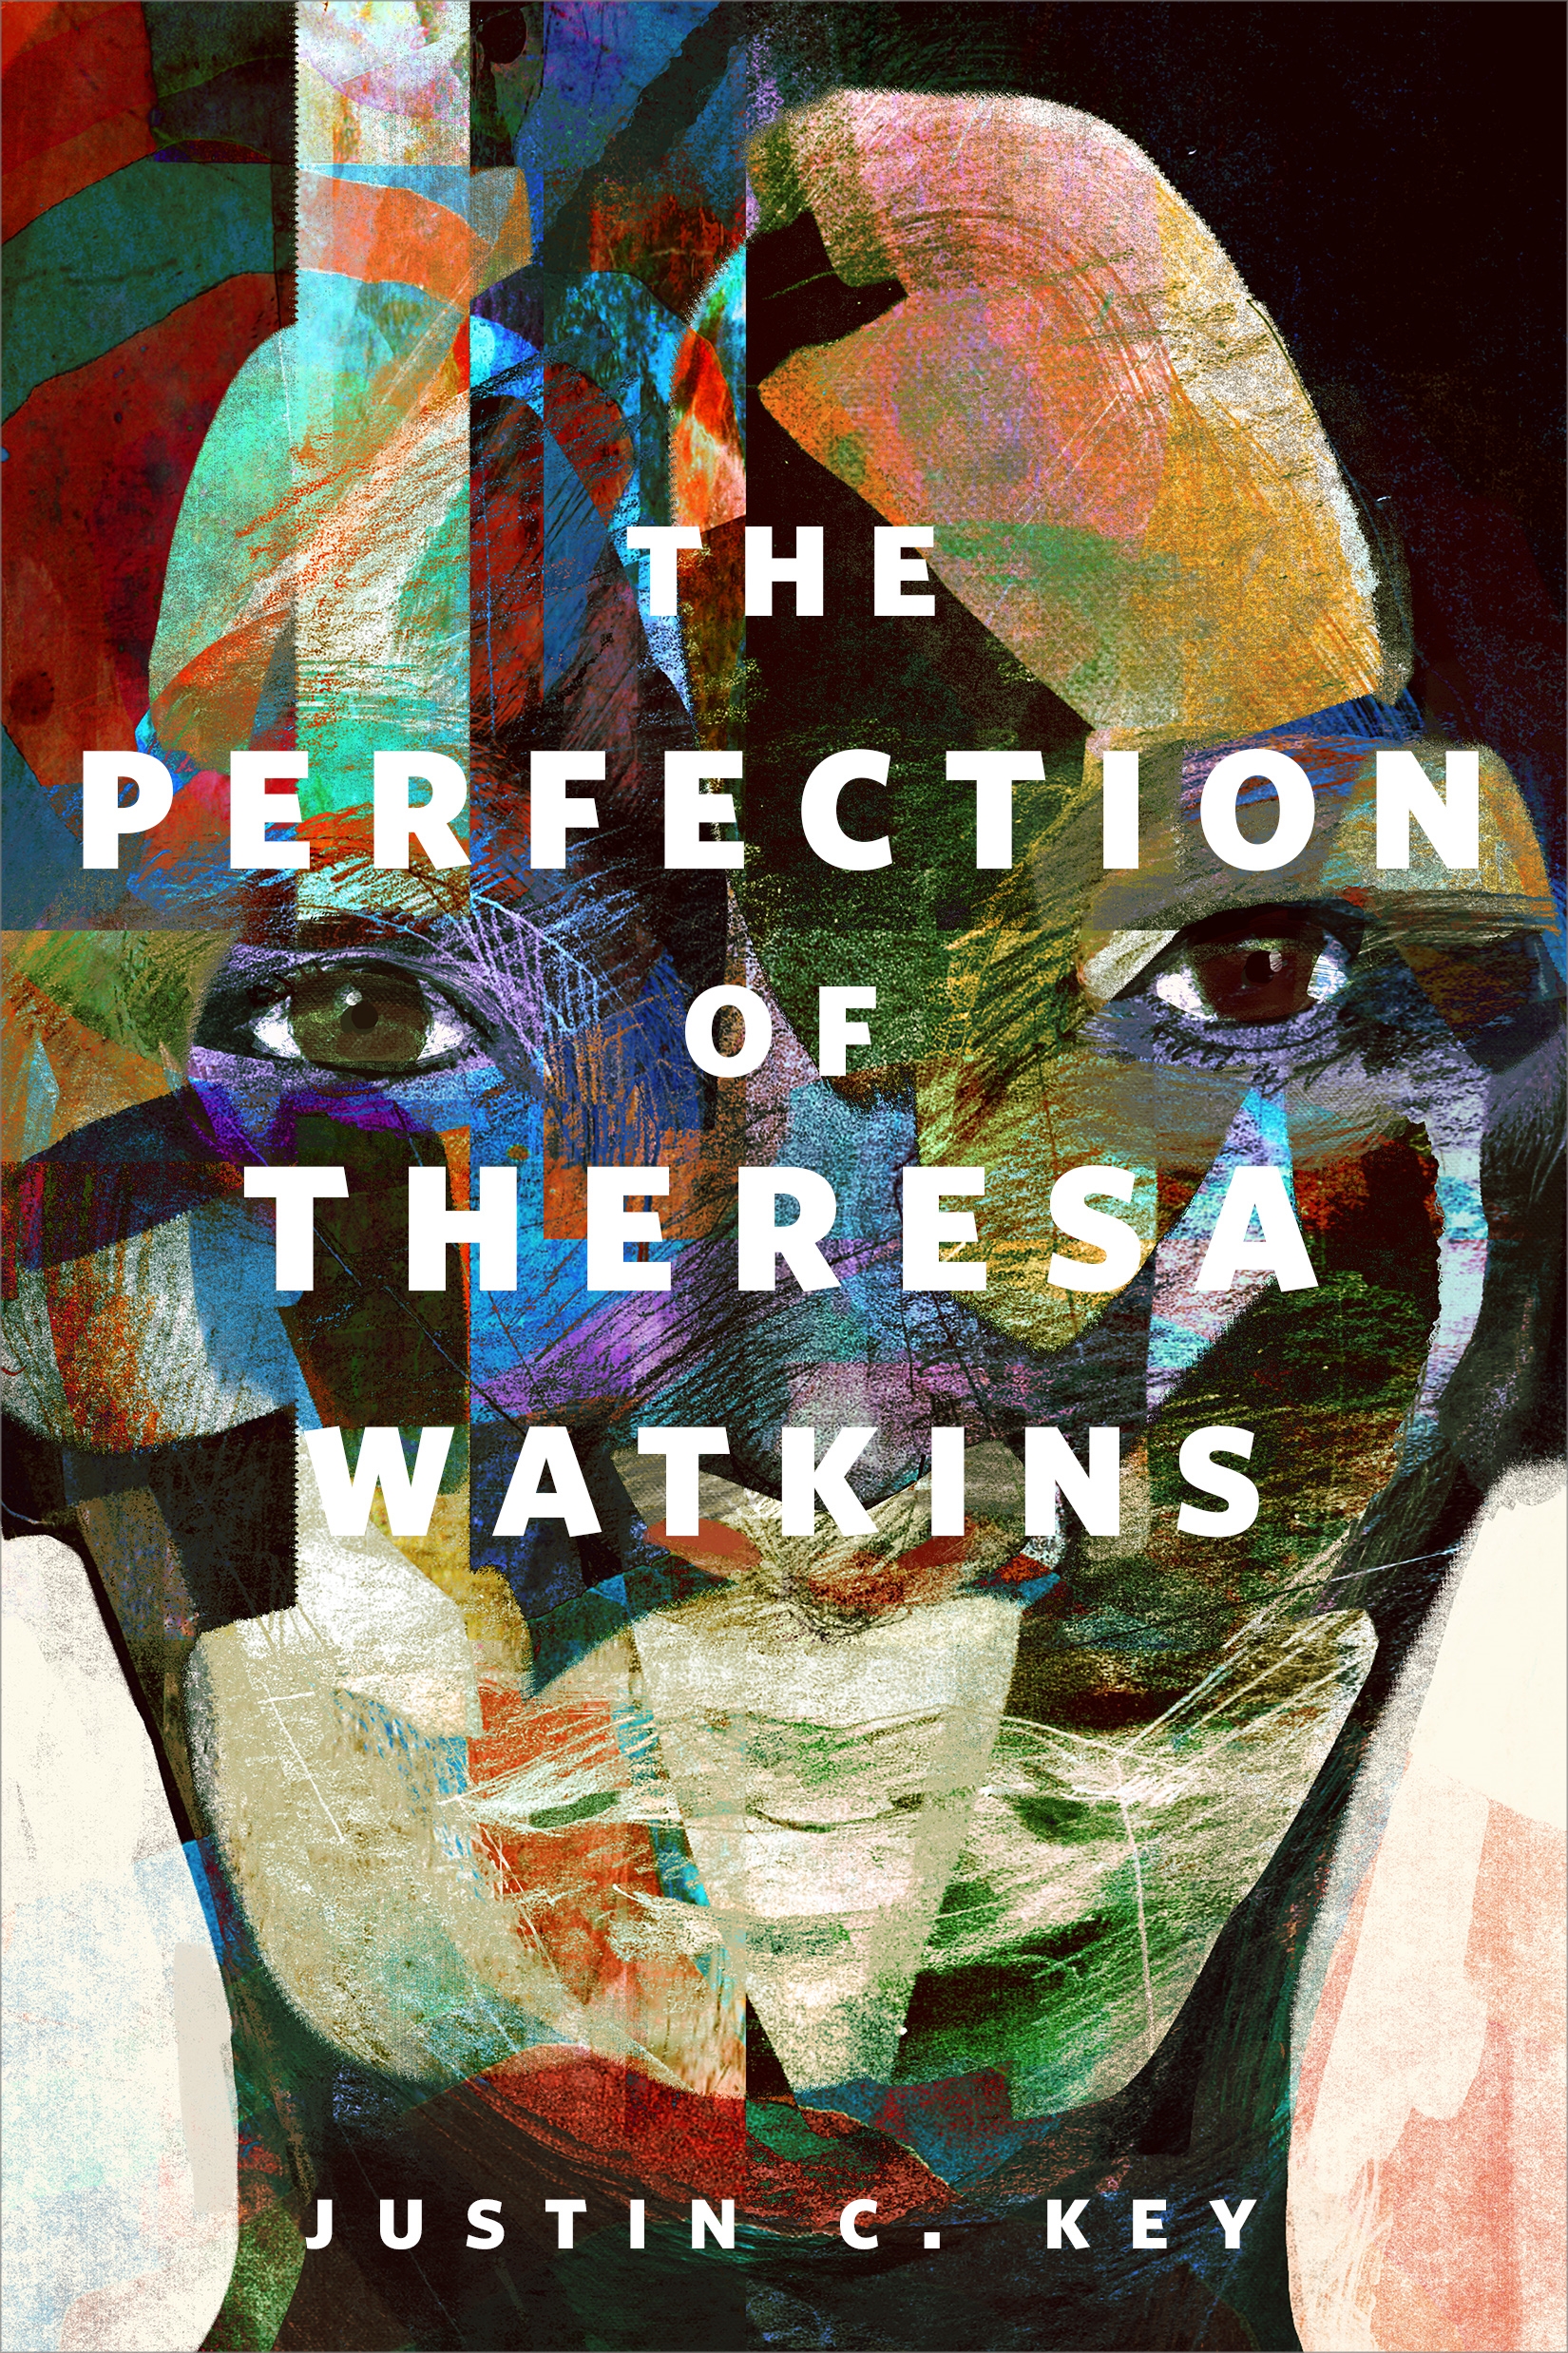 The Perfection of Theresa Watkins : A Tor.com Original by Justin C. Key